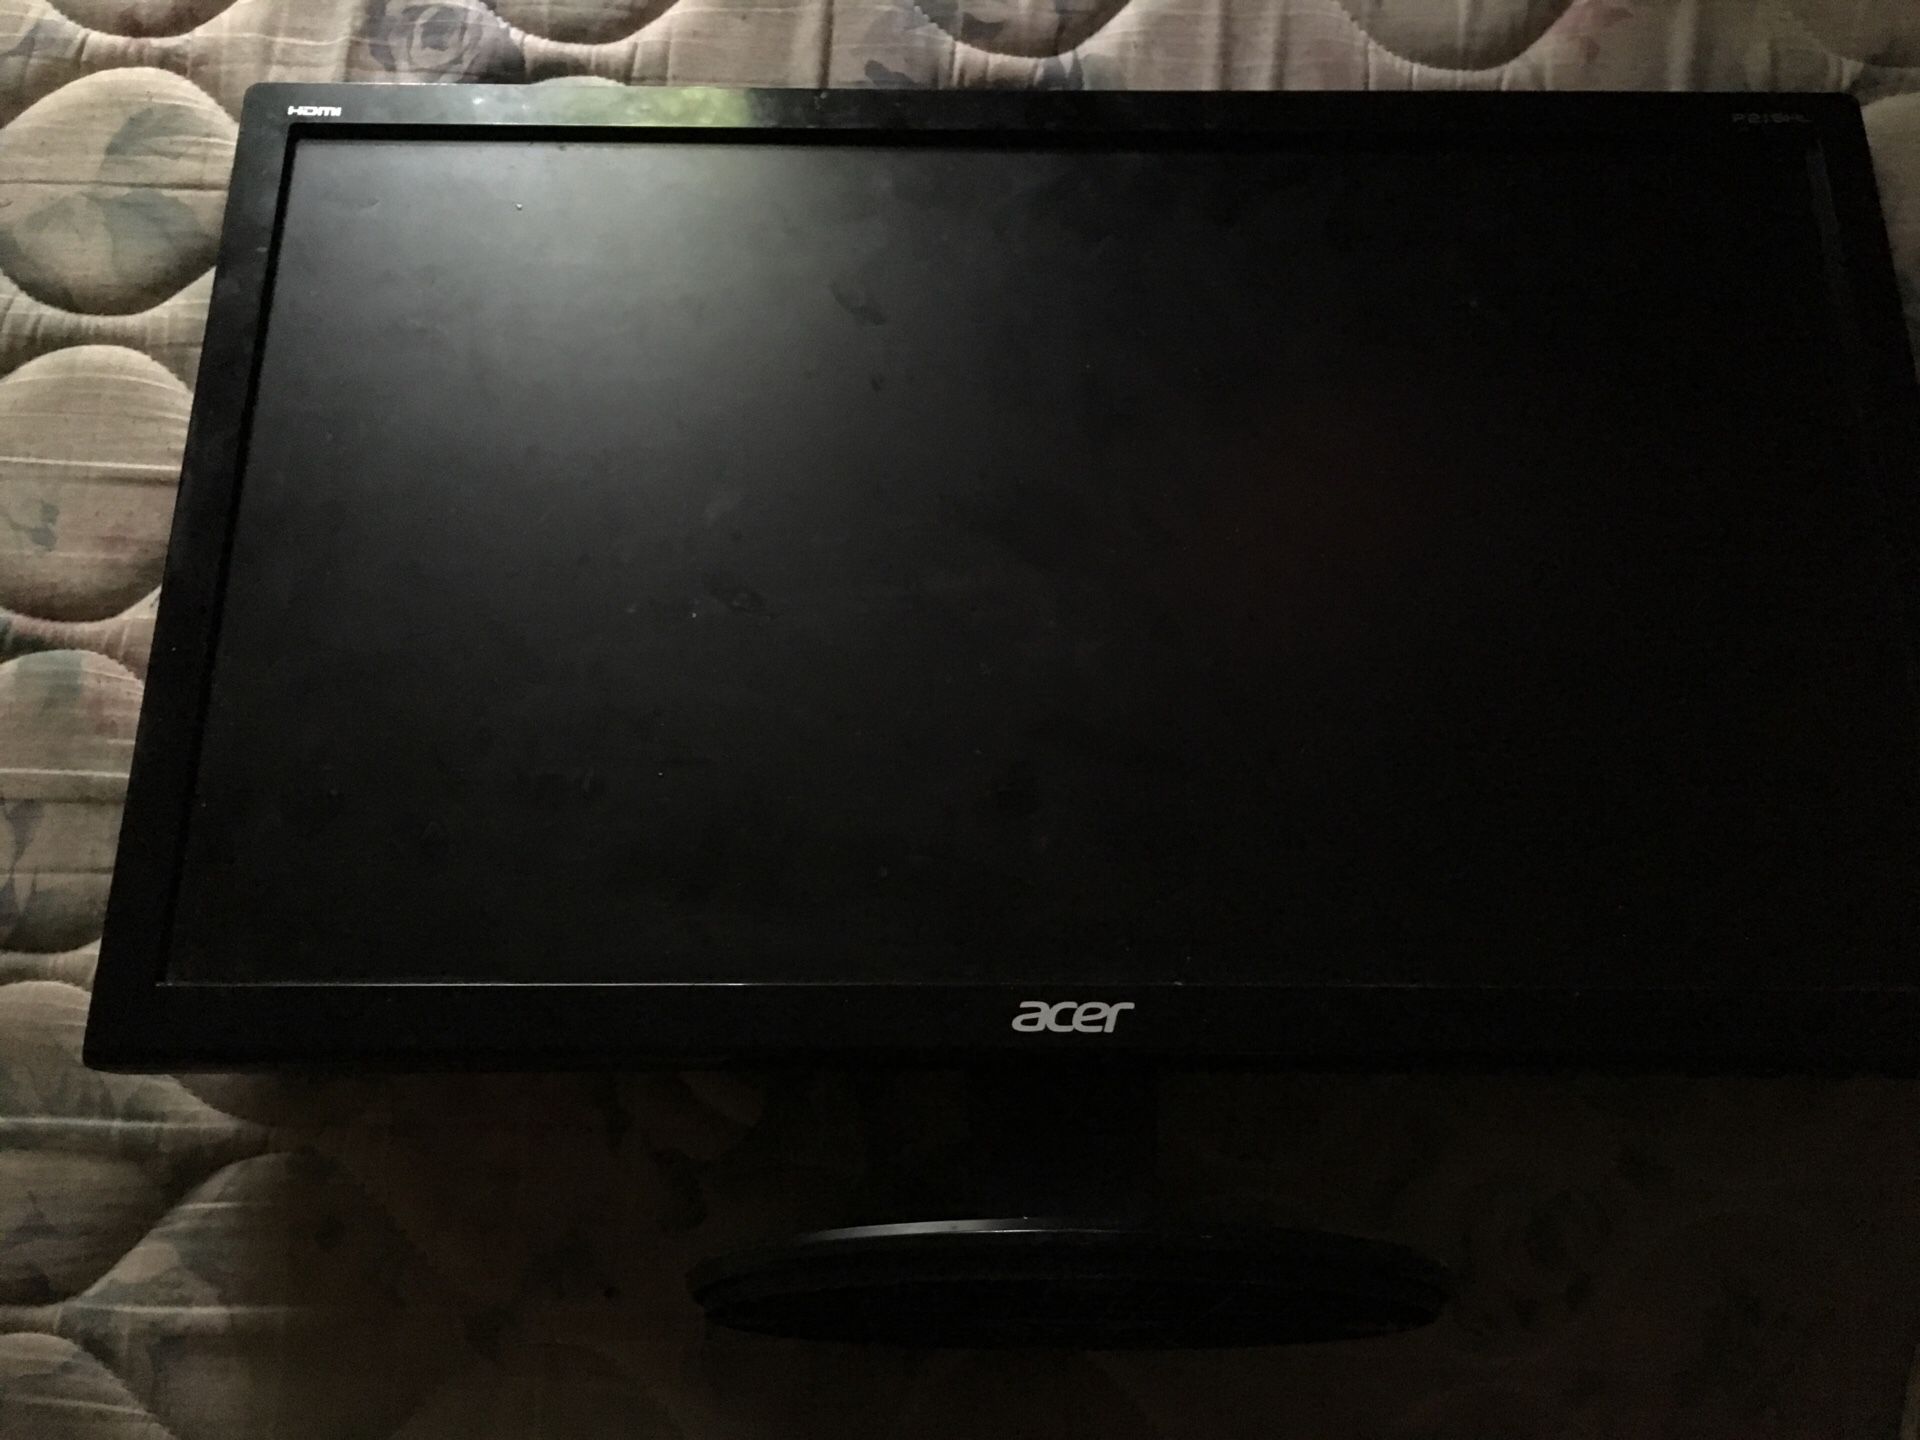 Acer computer monitor that’s like new